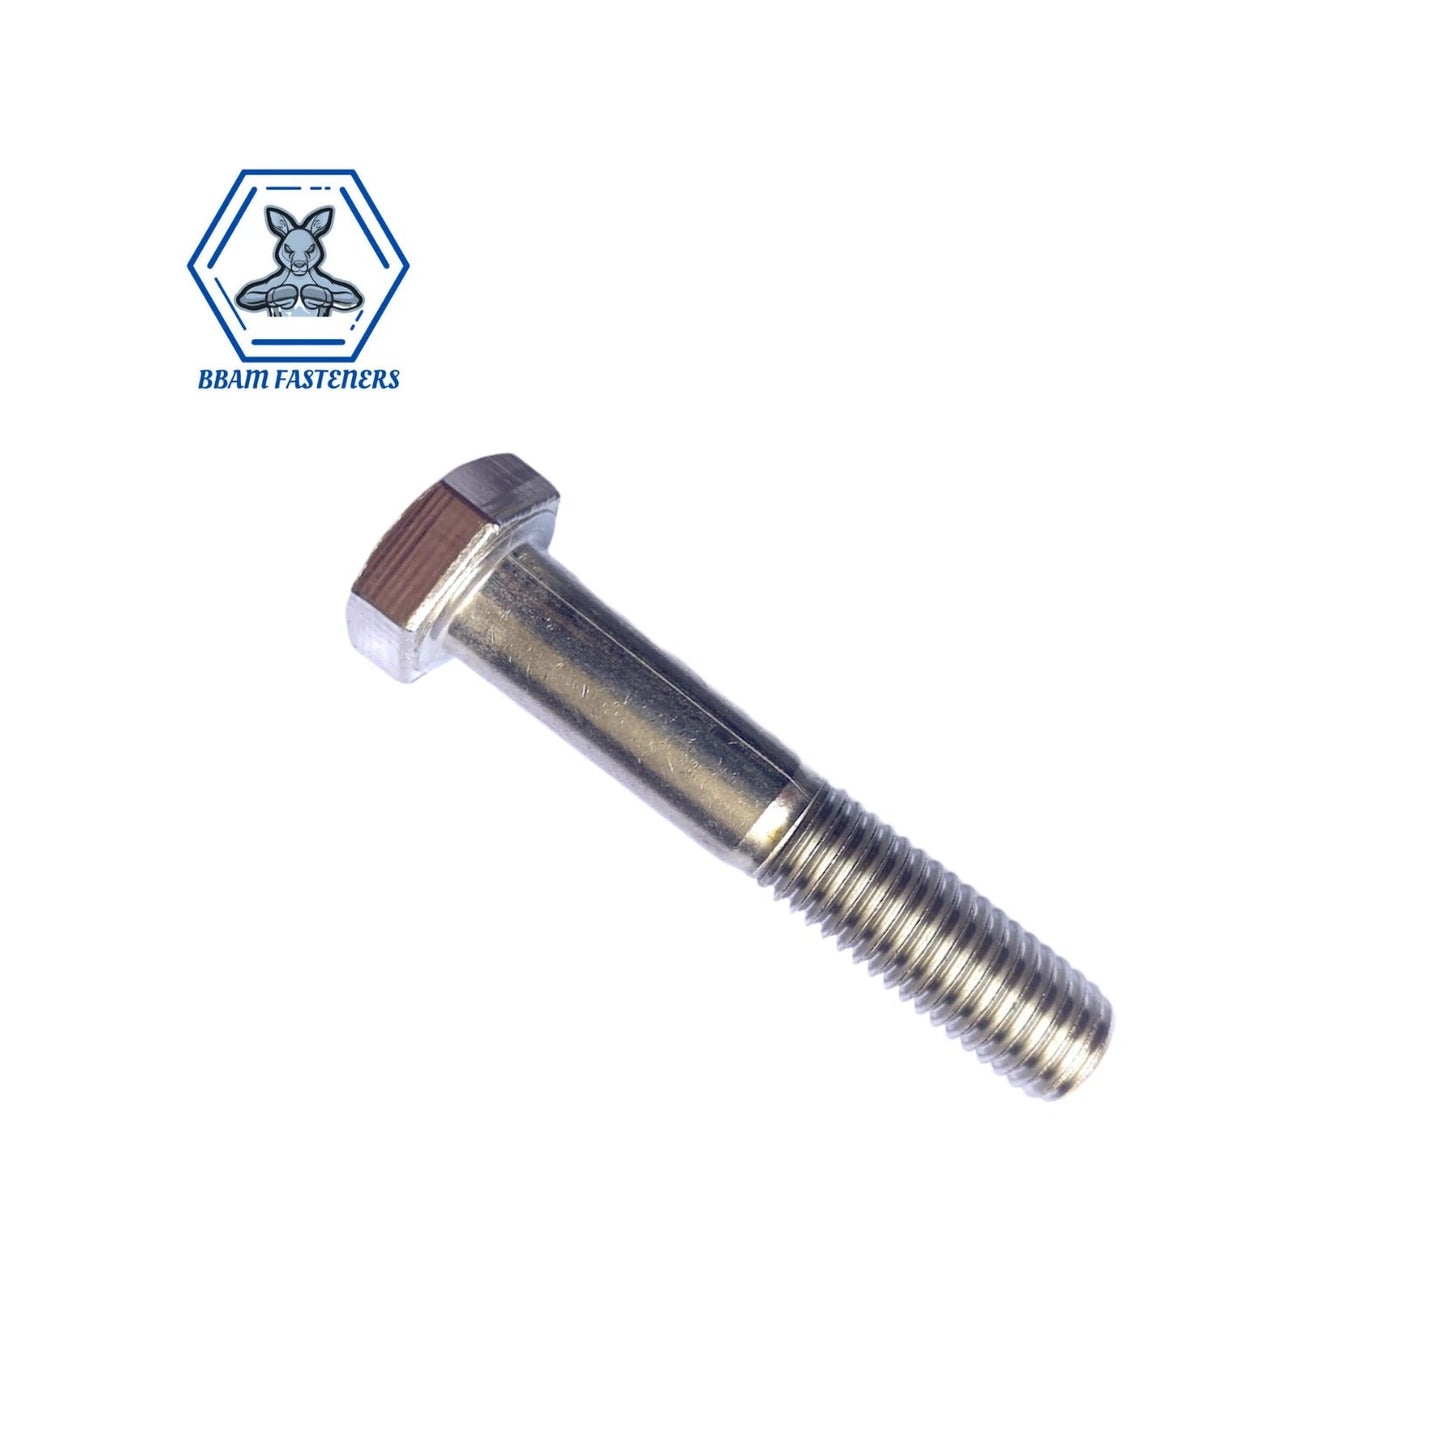 M6 x 45mm Hex Head Bolt Stainless Steel